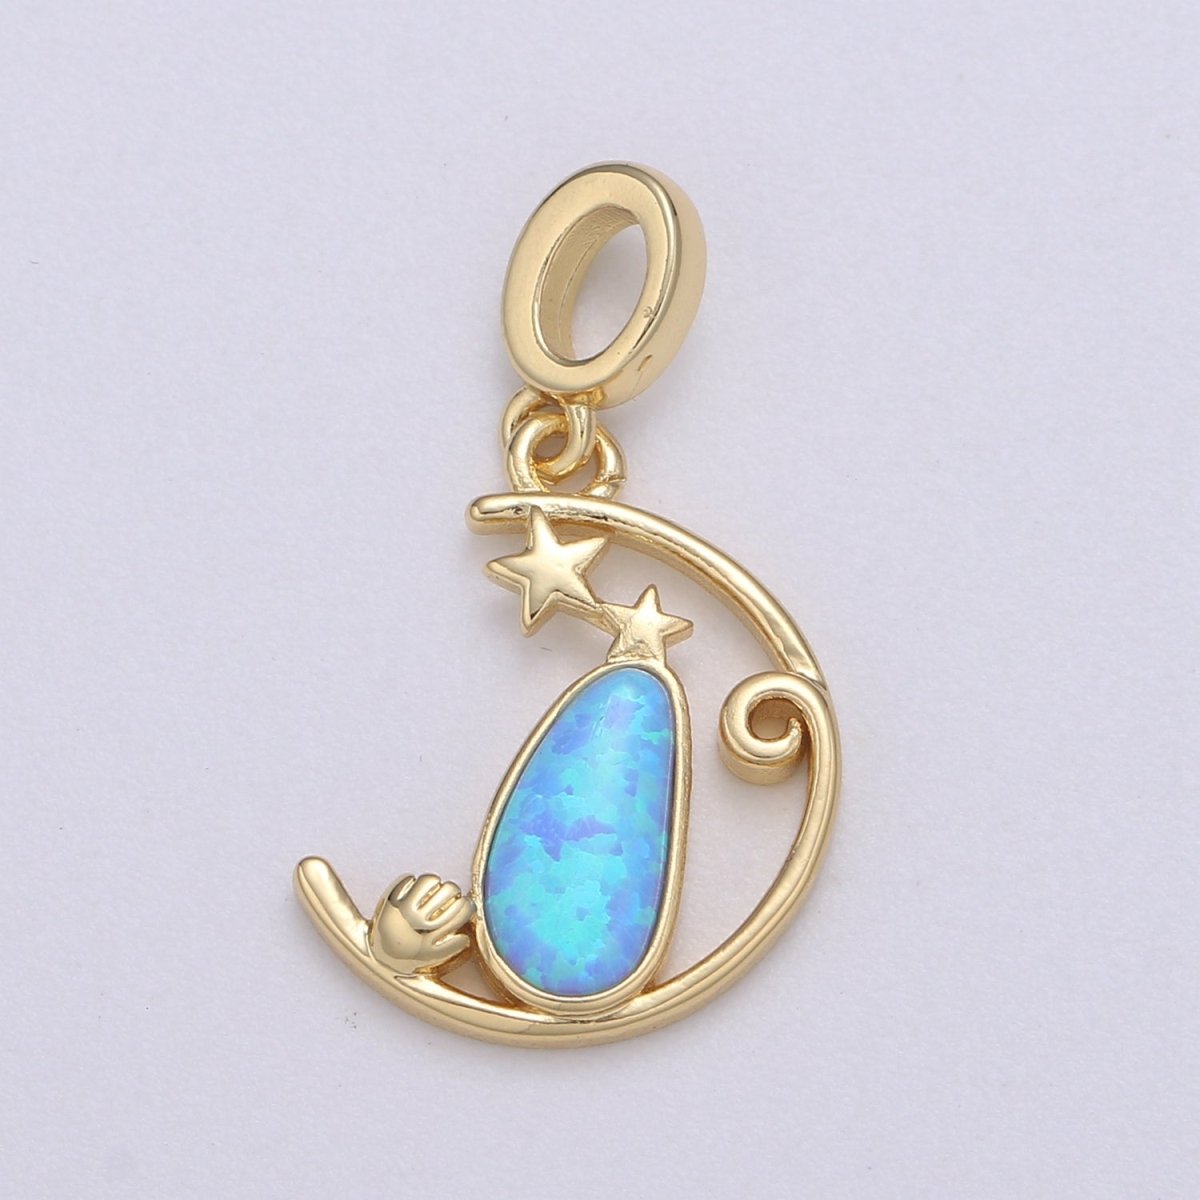 Blue and White Opal 24K Star Pendant, Teardrop Opal Charm Baby Hand Charm for Bracelet Earring Necklace H-608 H-612 - DLUXCA